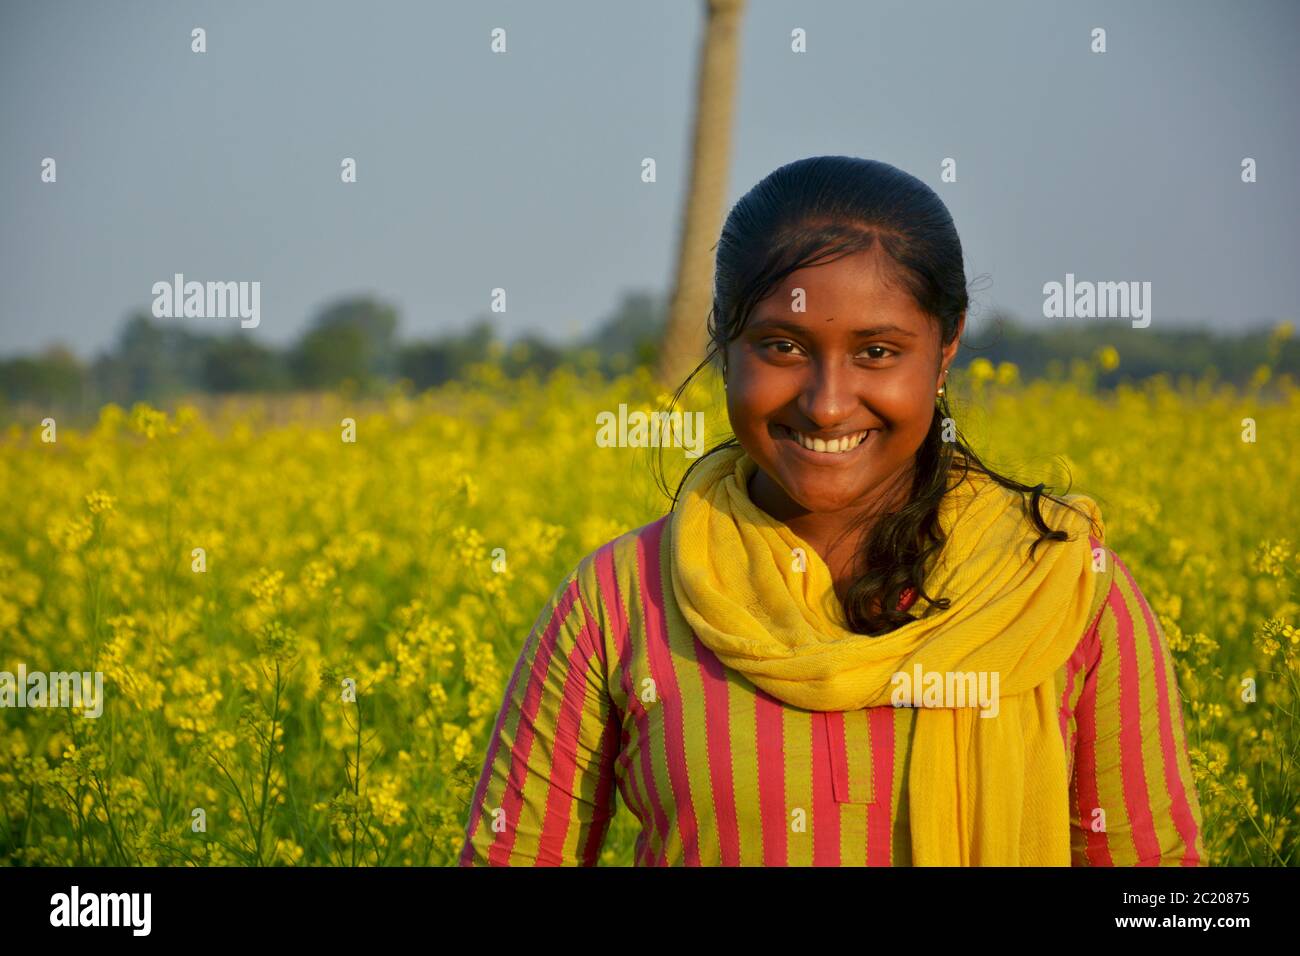 : An Indian teenage girls smiling and posing for photograph in a mustard field, selective focusing Stock Photo